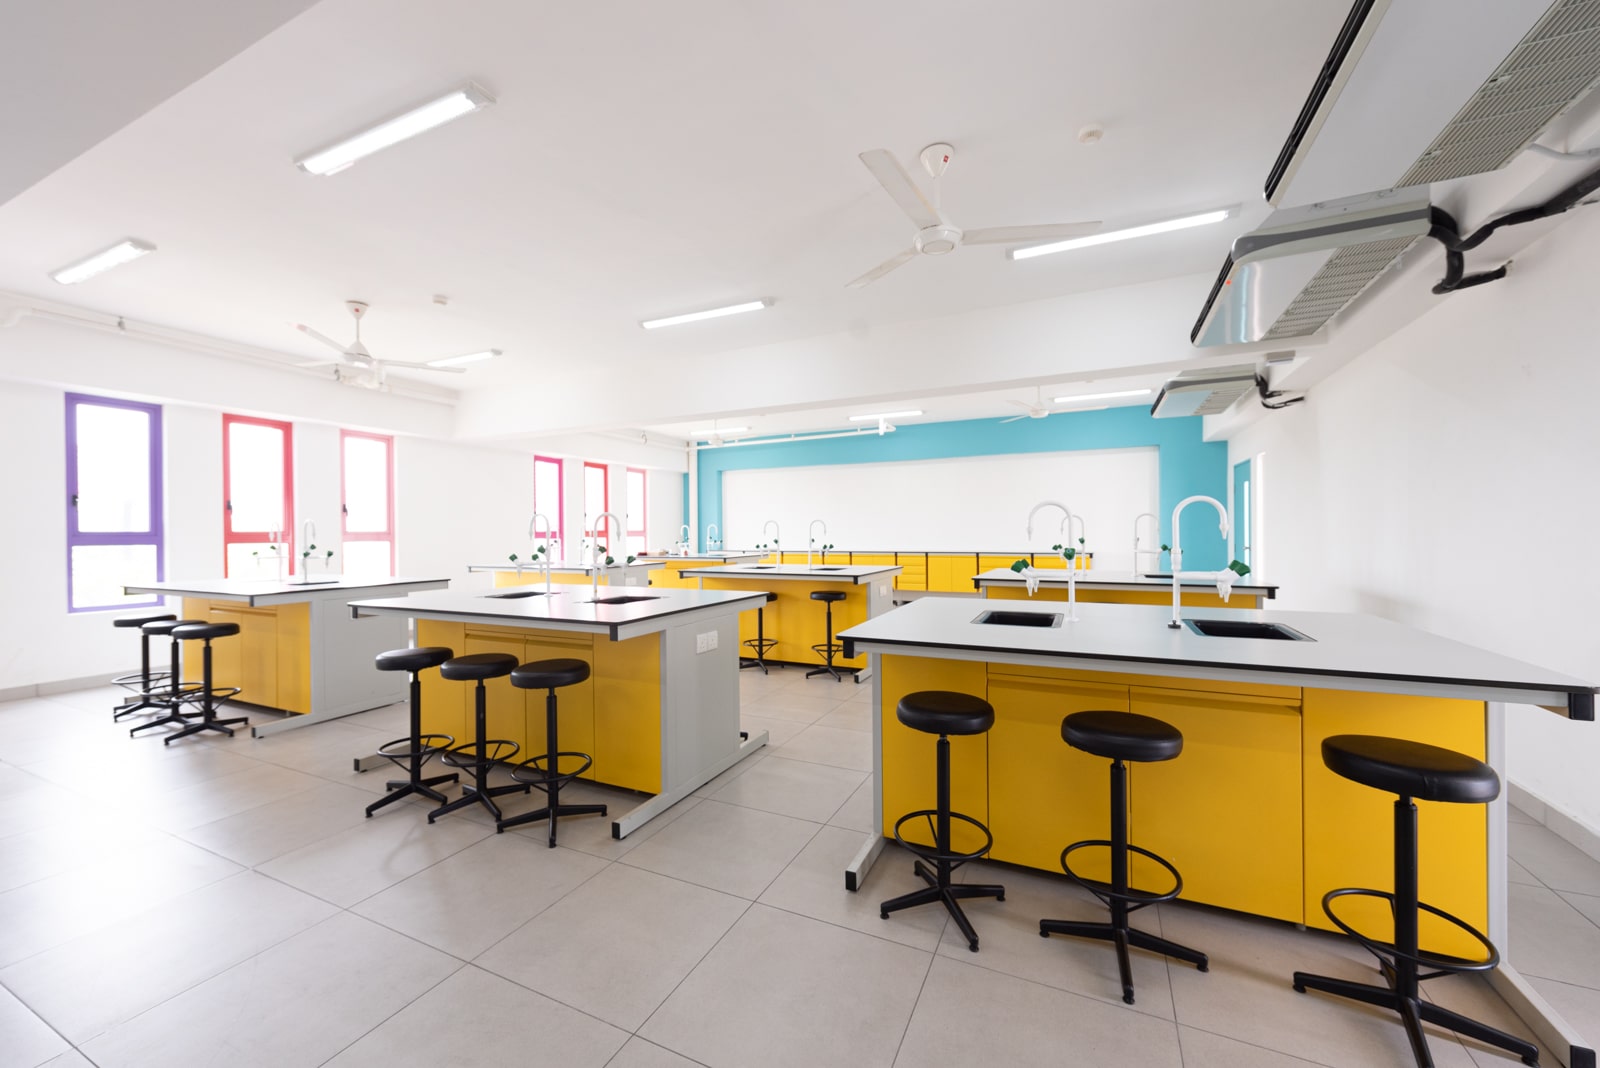 State-Of-The-Art School Facilities